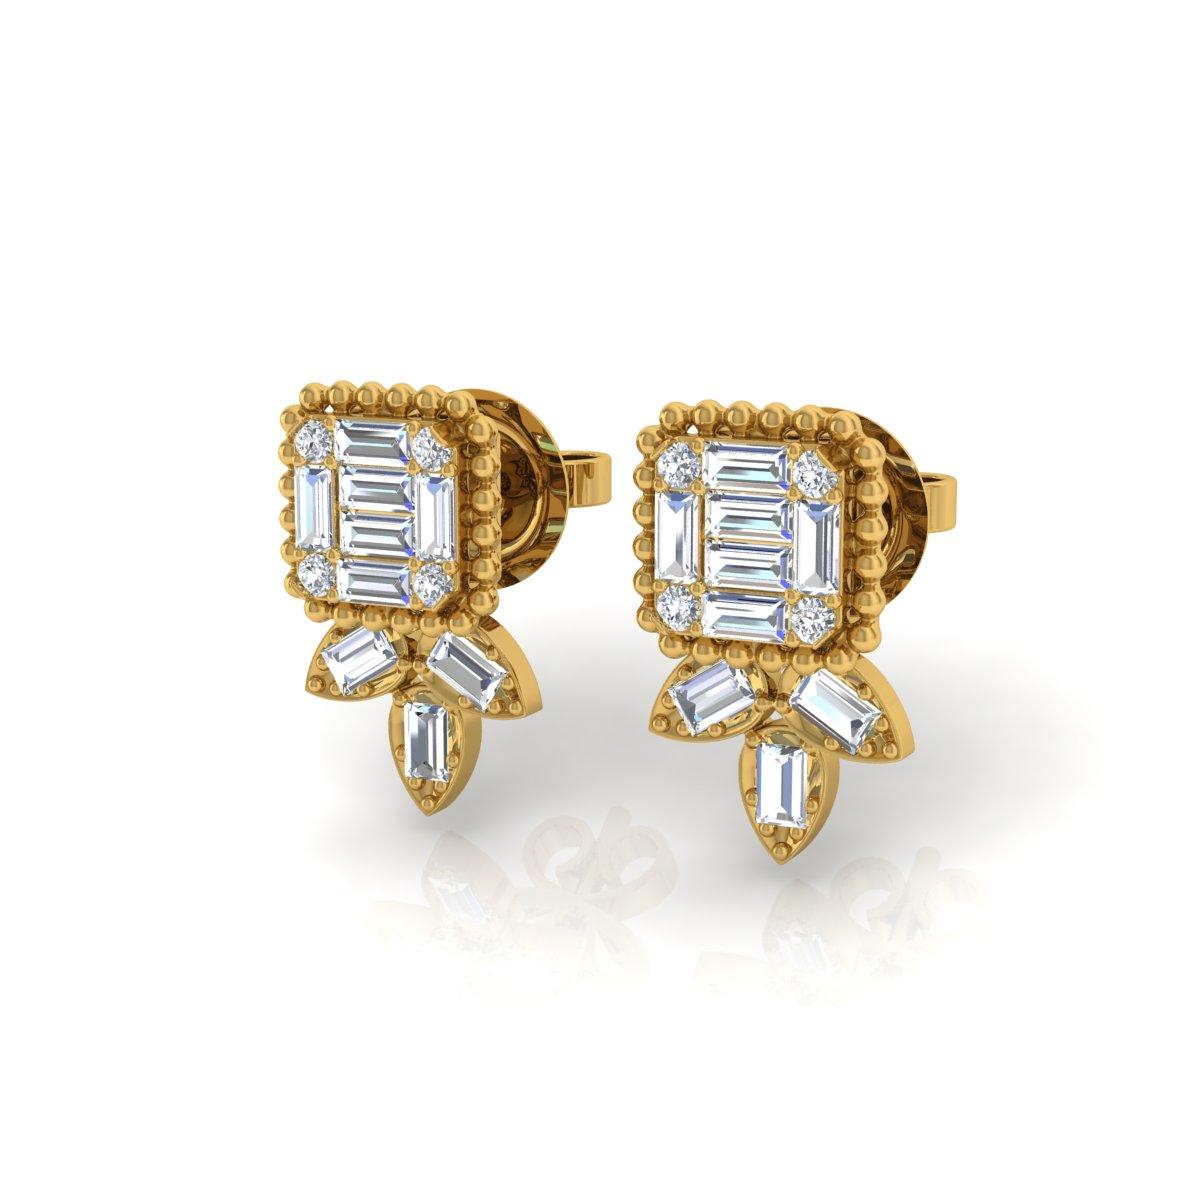 Item Code :- SEE-11757
Gross Weight :- 3.82 gm
18k Yellow Gold Weight :- 3.57 gm
Diamond Weight :- 1.27 Carat  ( AVERAGE DIAMOND CLARITY SI1-SI2 & COLOR H-I )
Earrings Length :- 16 mm approx.
✦ Sizing
.....................
We can adjust most items